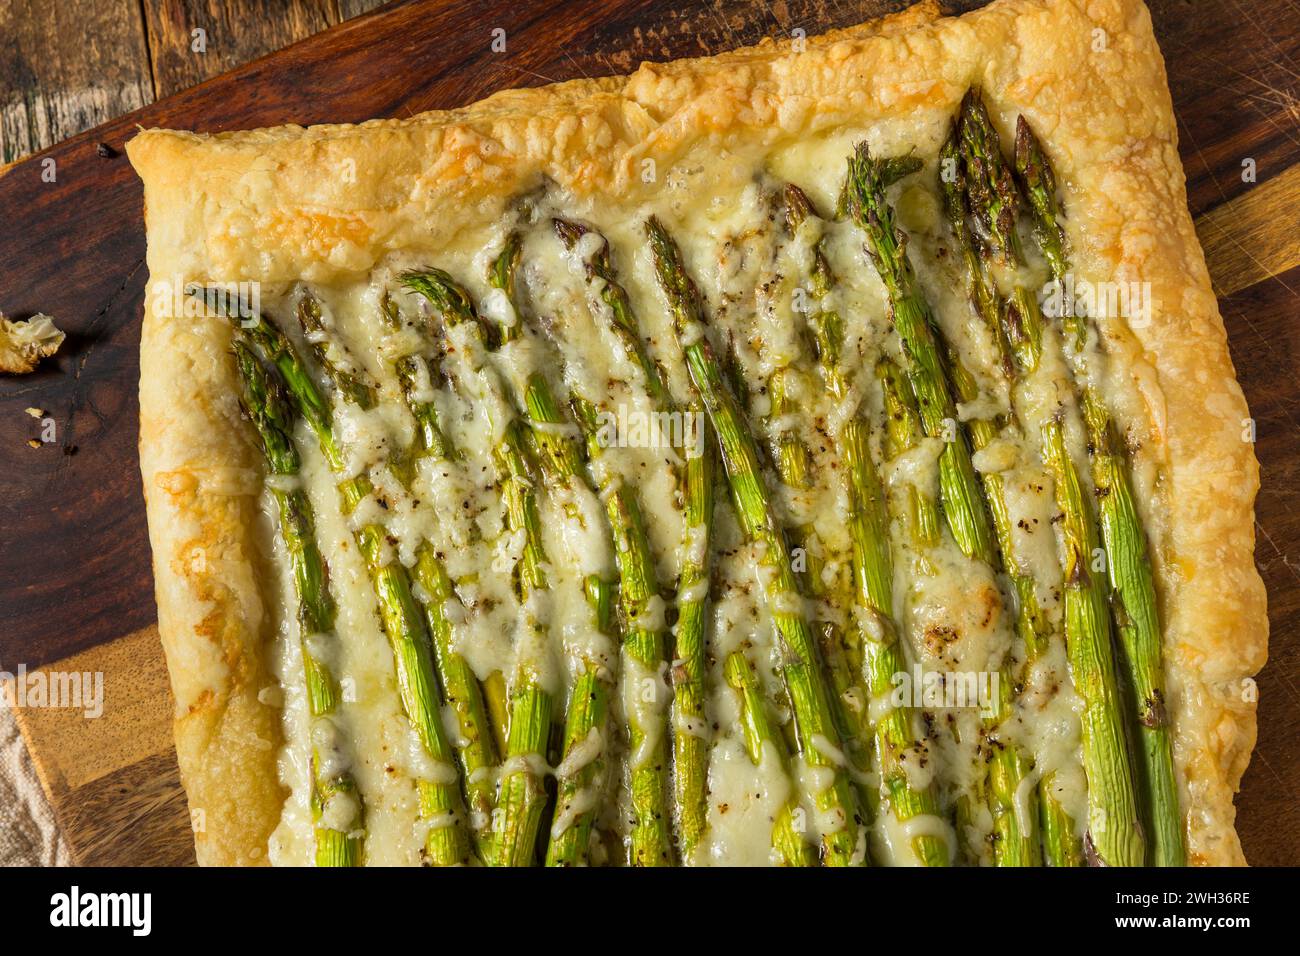 Homemade Baked Puff Pastry Asparagus Tart with Cheese for an Appetizer Stock Photo